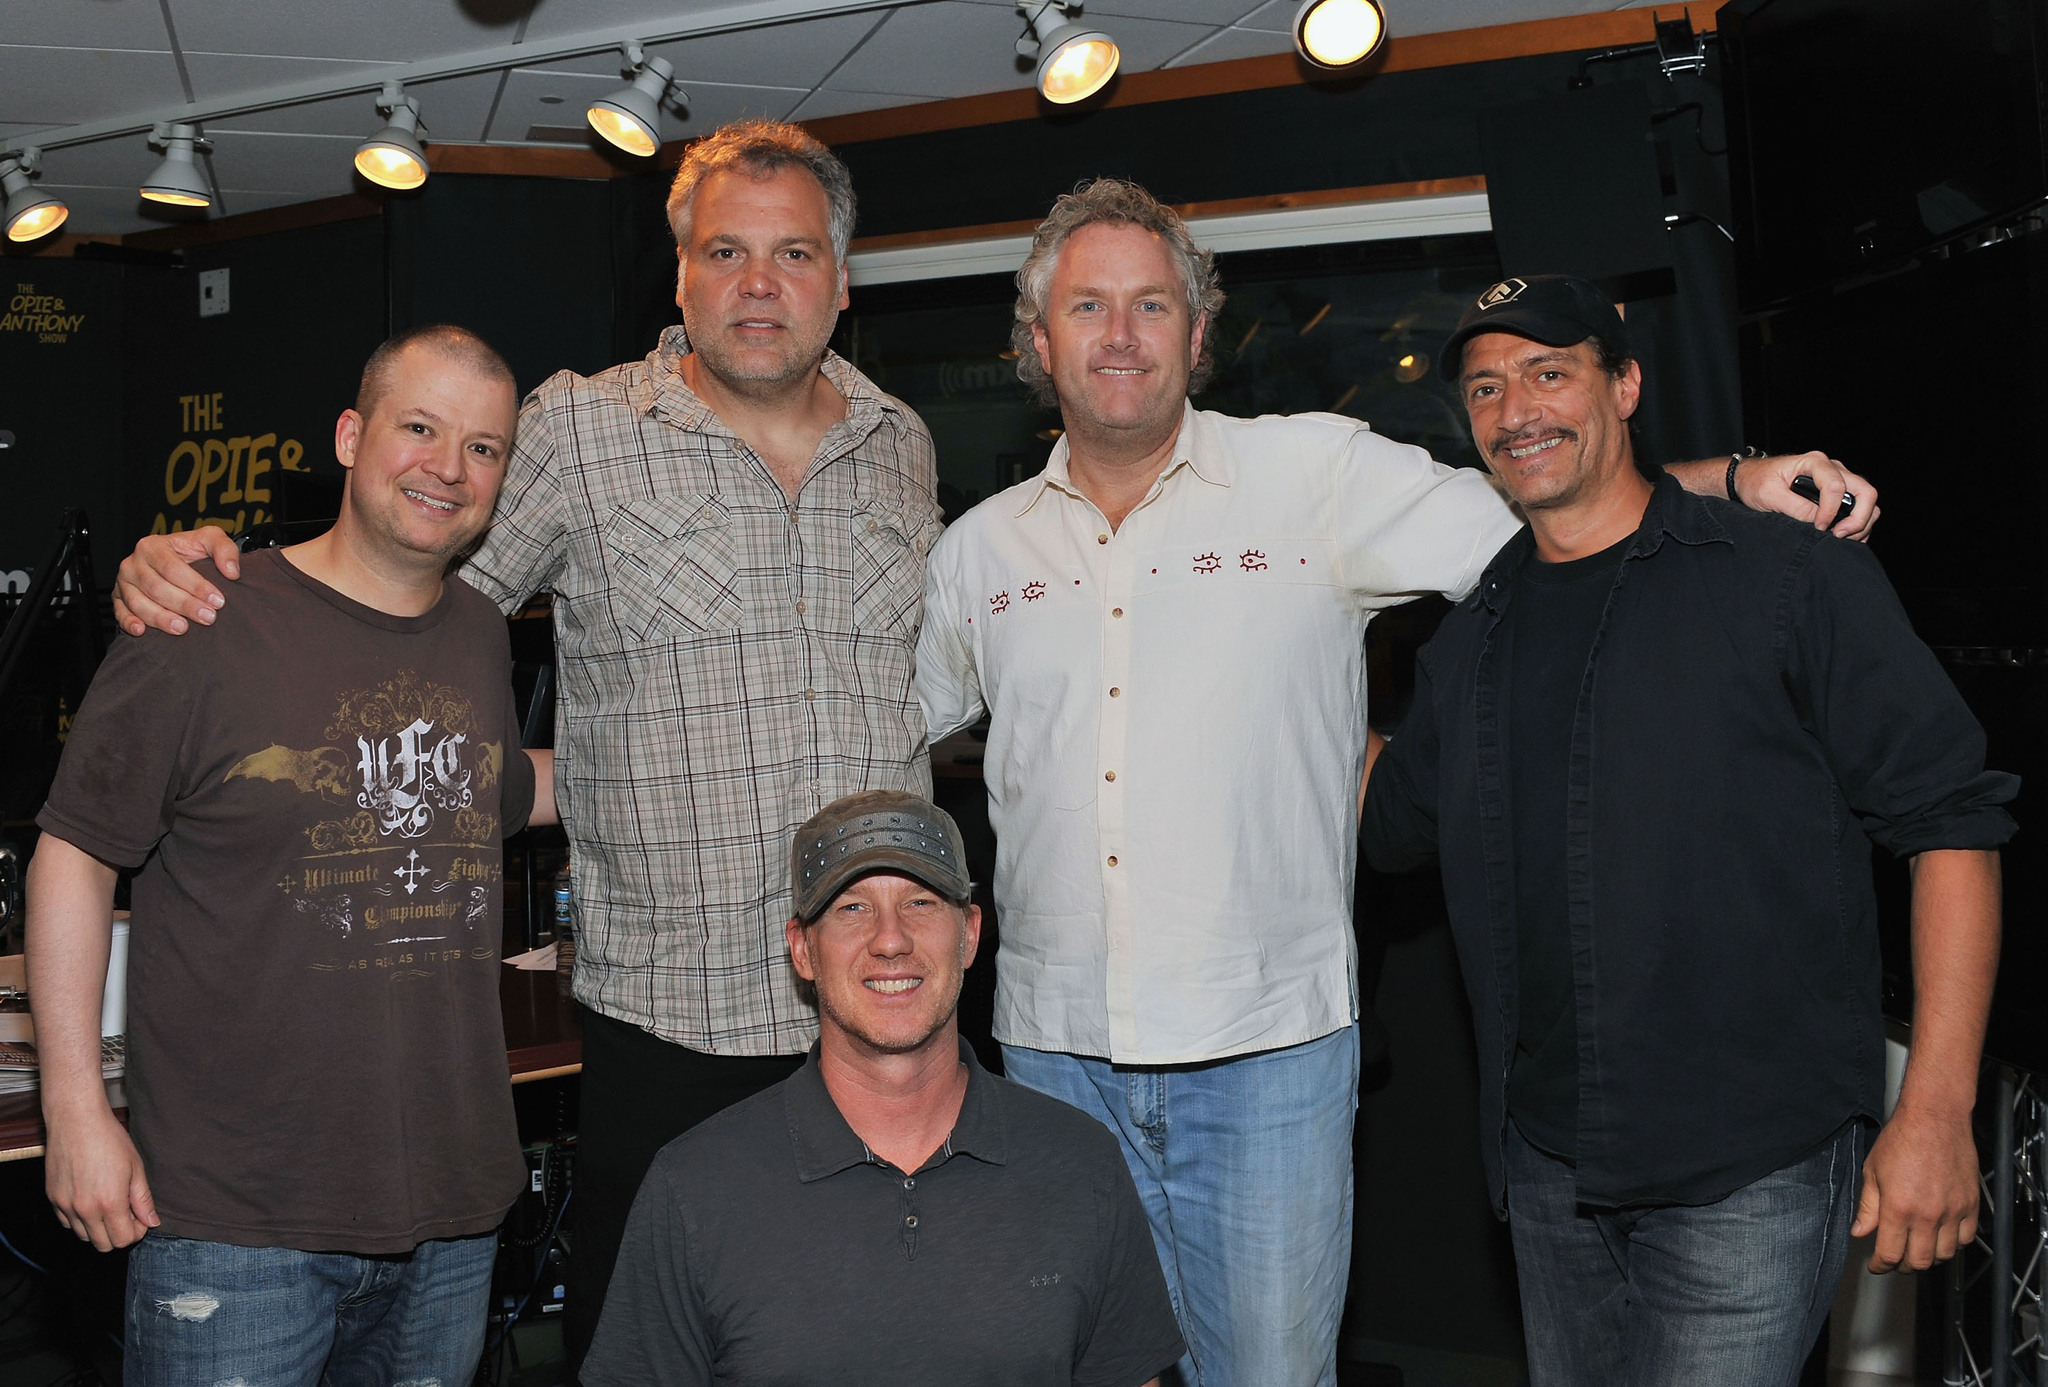 Vincent D'Onofrio, Jim Norton, Andrew Breitbart and Anthony Cumia